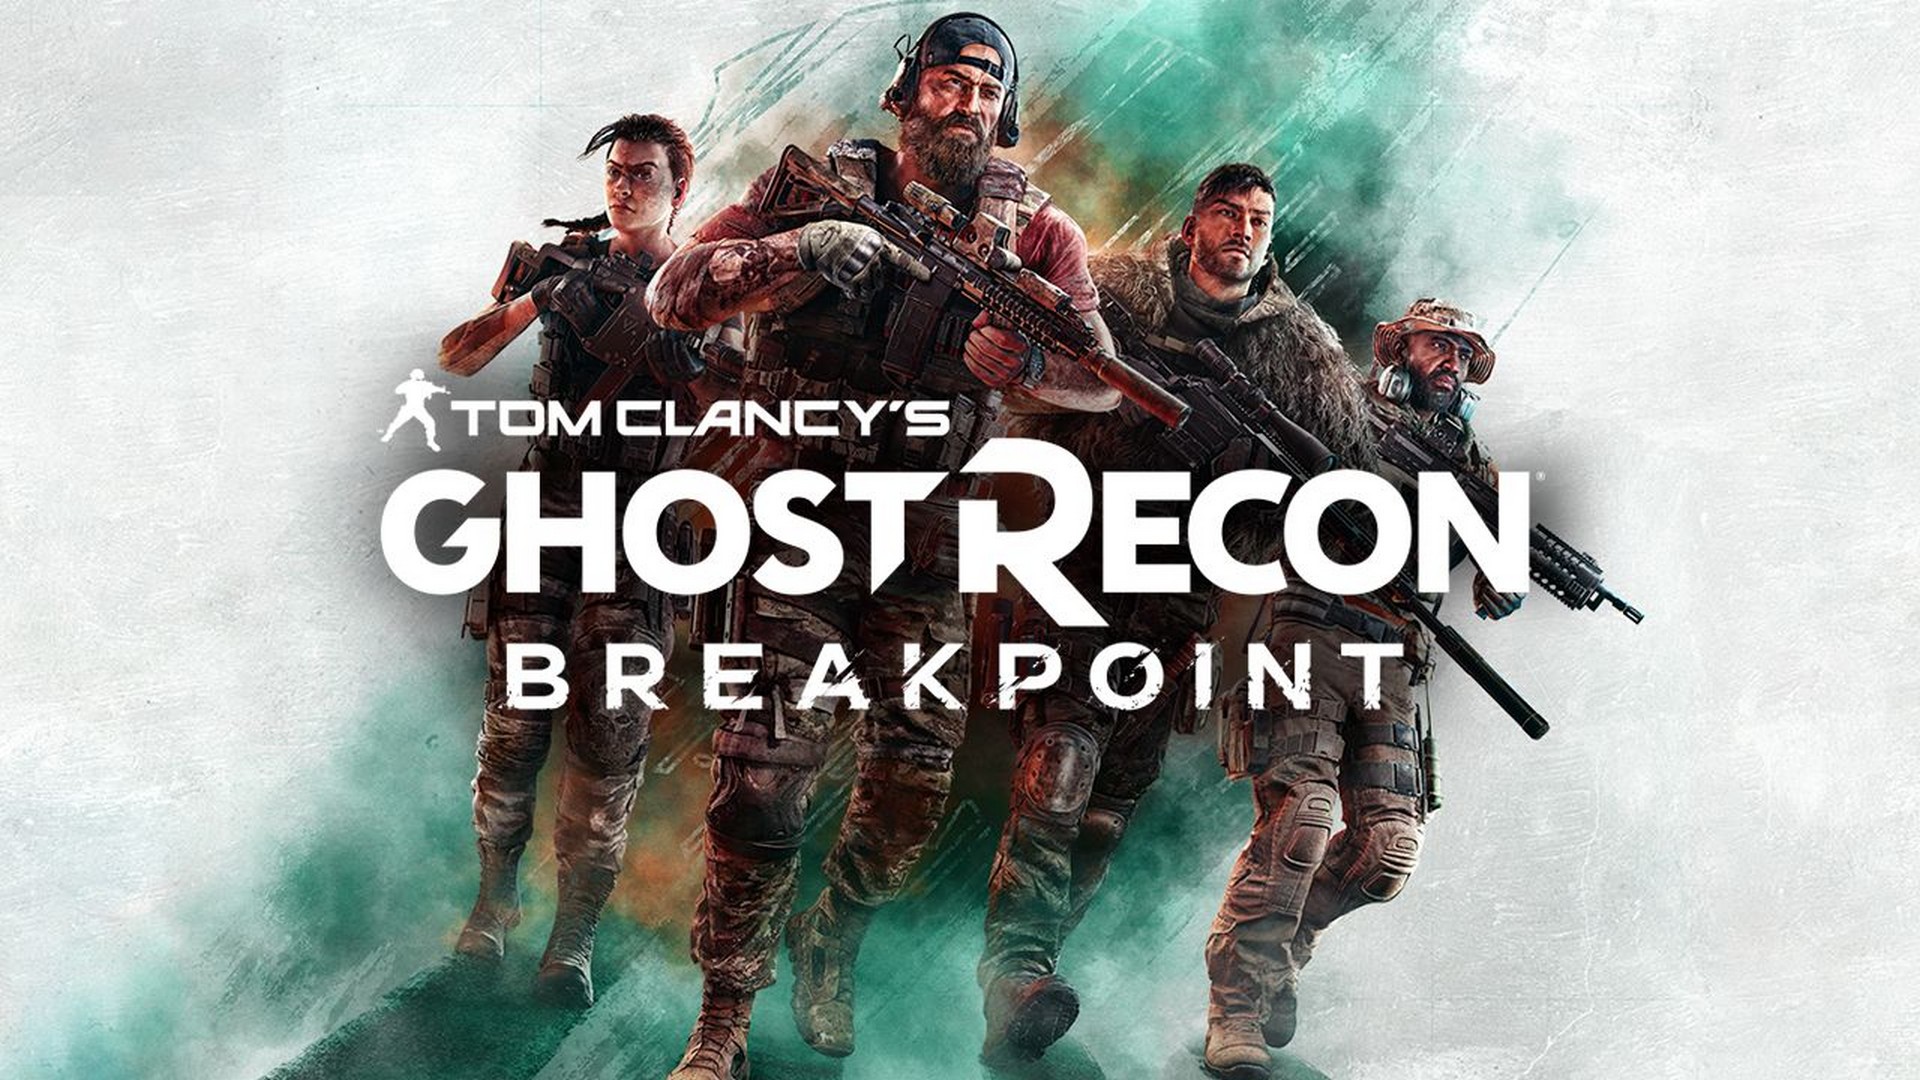 Tom Clancy’s Ghost Recon Breakpoint Releases New Teammates Update, Announces Free Weekend